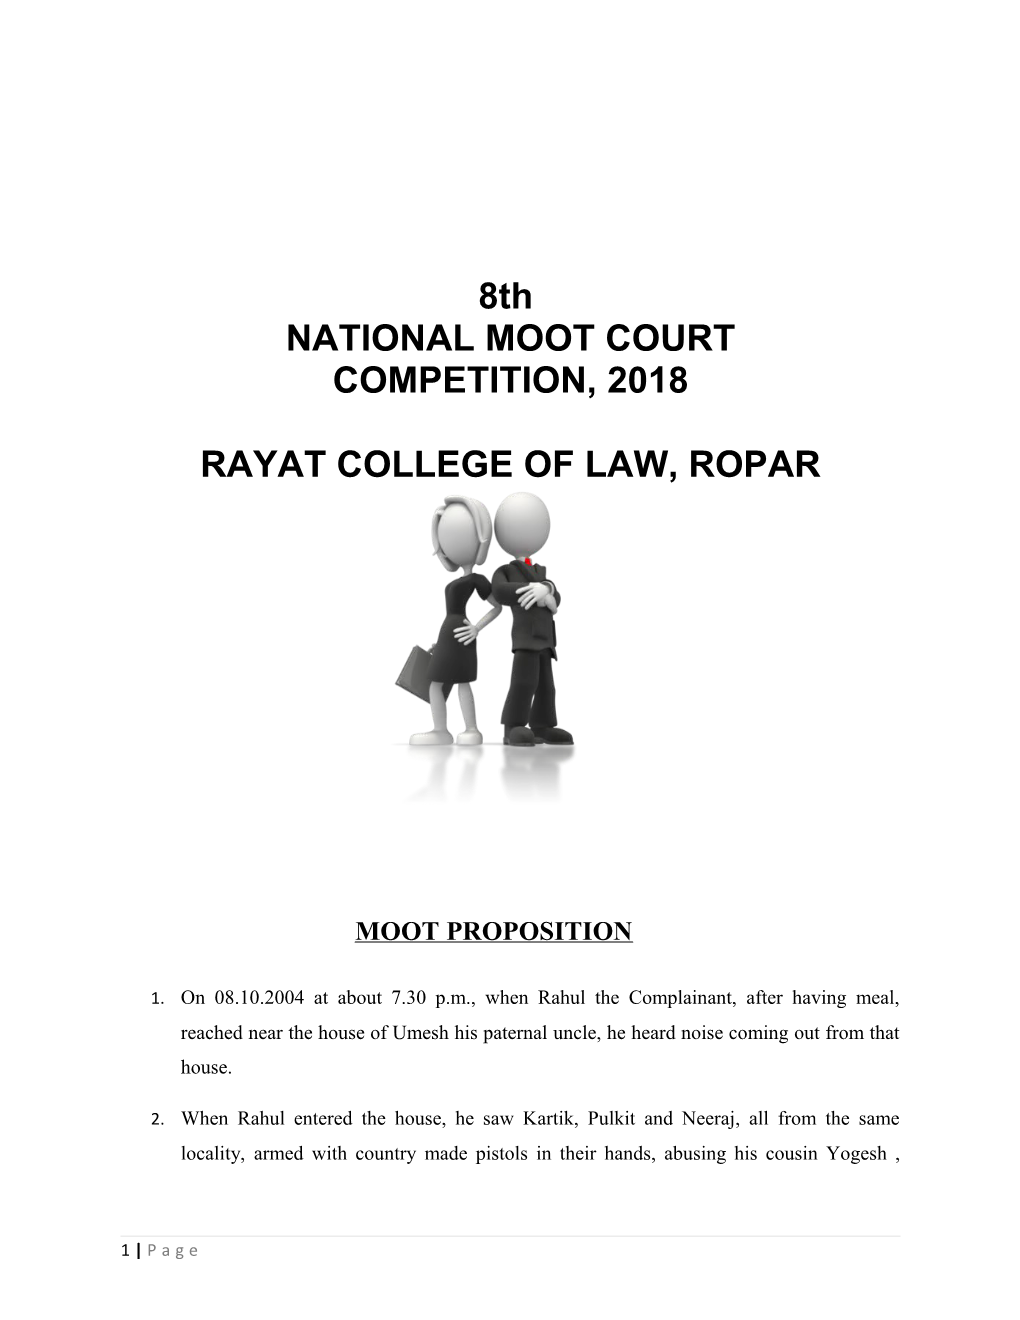 National Moot Court